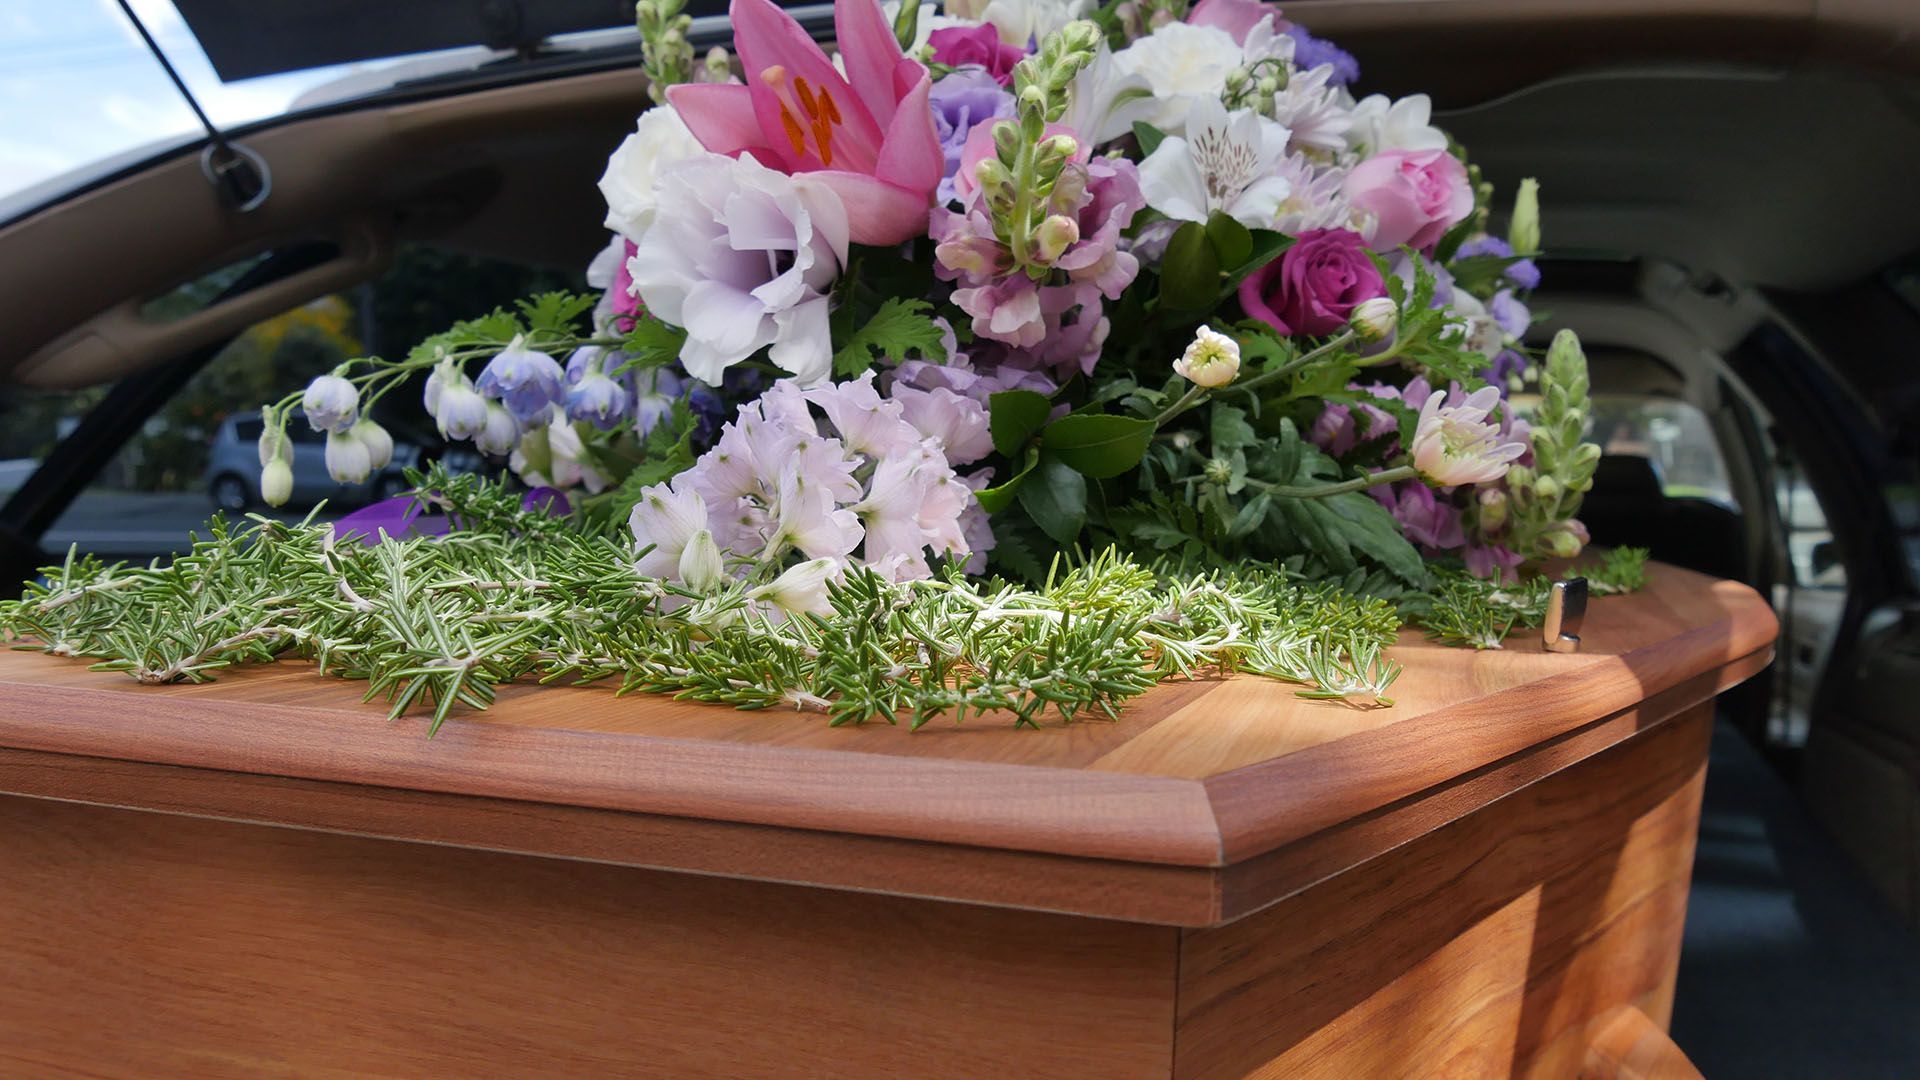 Funeral Services provided at Sneed - Carnley Funeral Chapel in Lampasas County TX